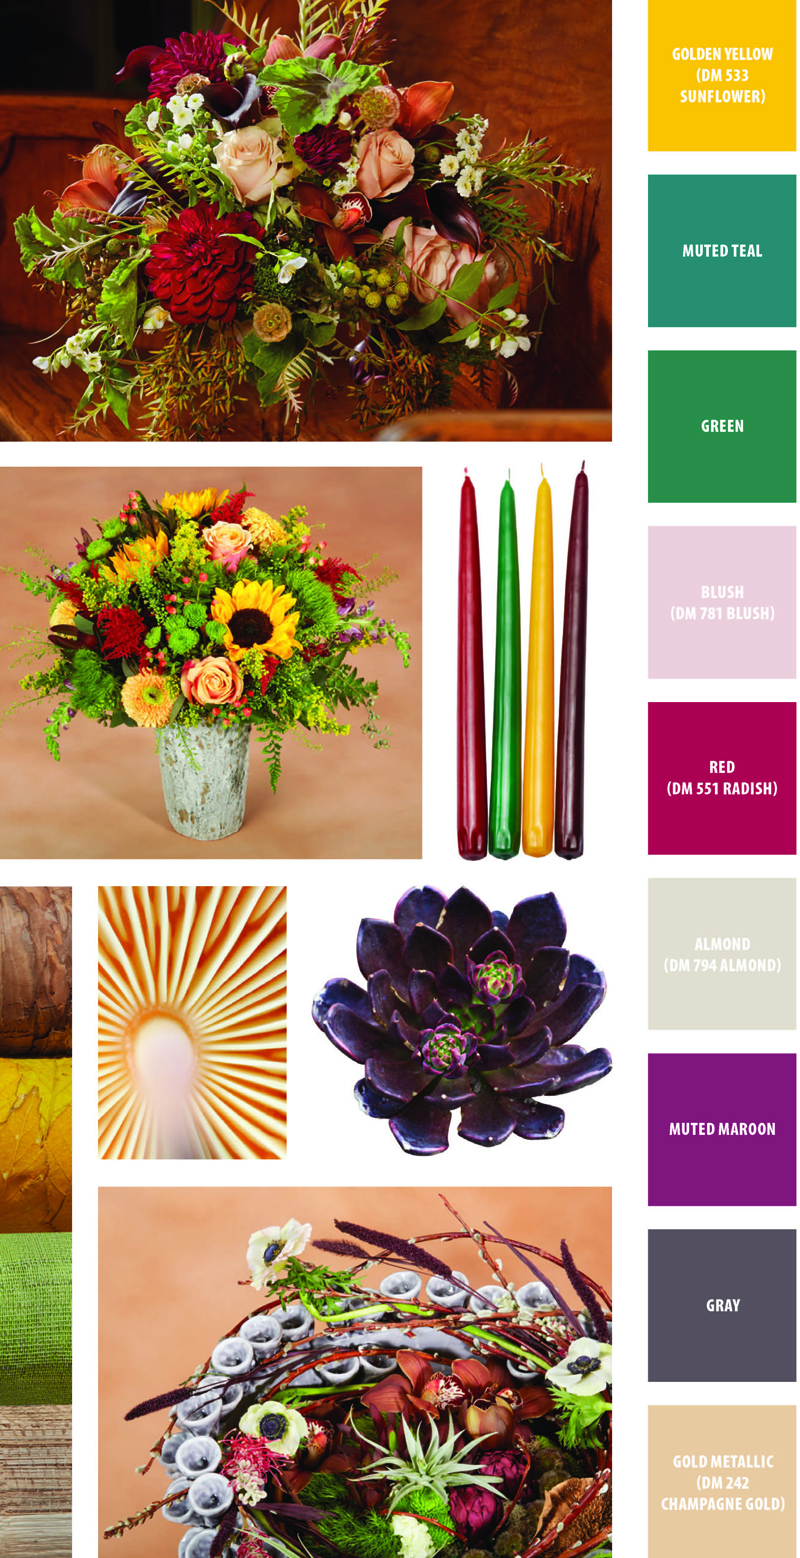 Forest Walk: Containers Flowers and Colors, Golden Yellow DM533 Sunflower, Muted Teal, Green, Blush DM781 Blush, Red DM551 Radish, Almond DM794 Almond, Muted Maroon, Gray, Gold Metallic DM242 Champagne Gold